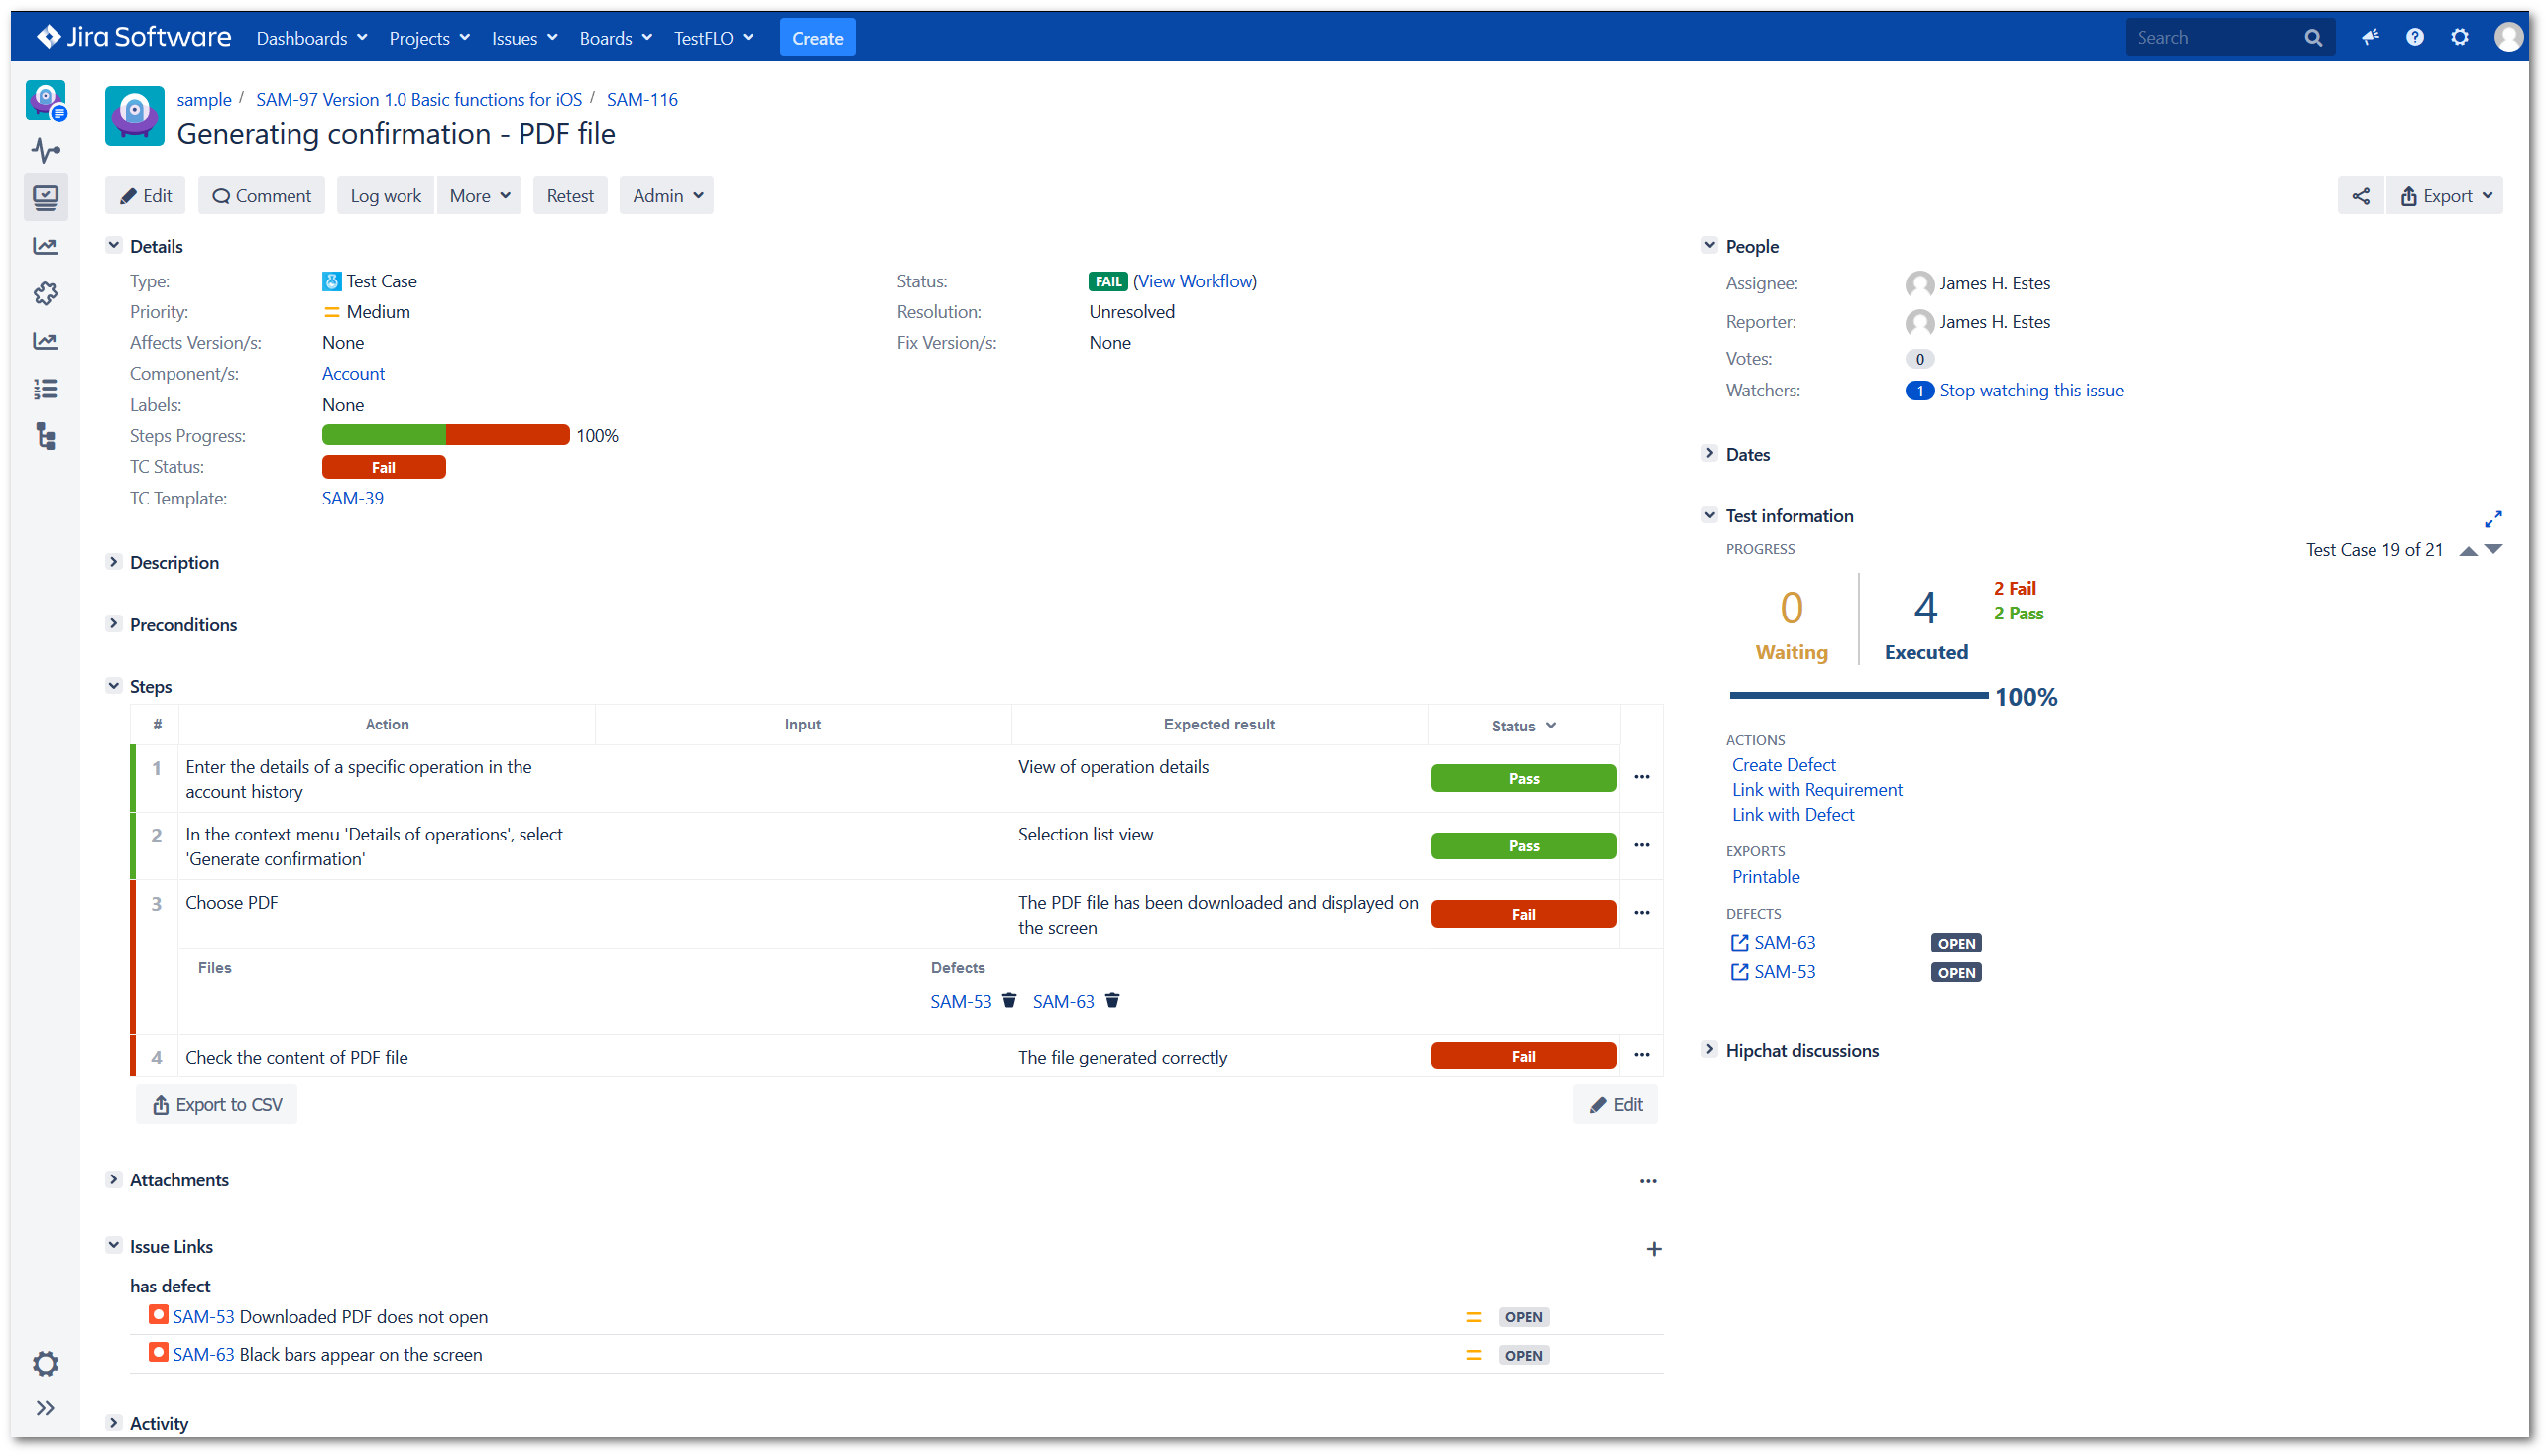 Link with Defect operation in TestFLO Jira Test Management